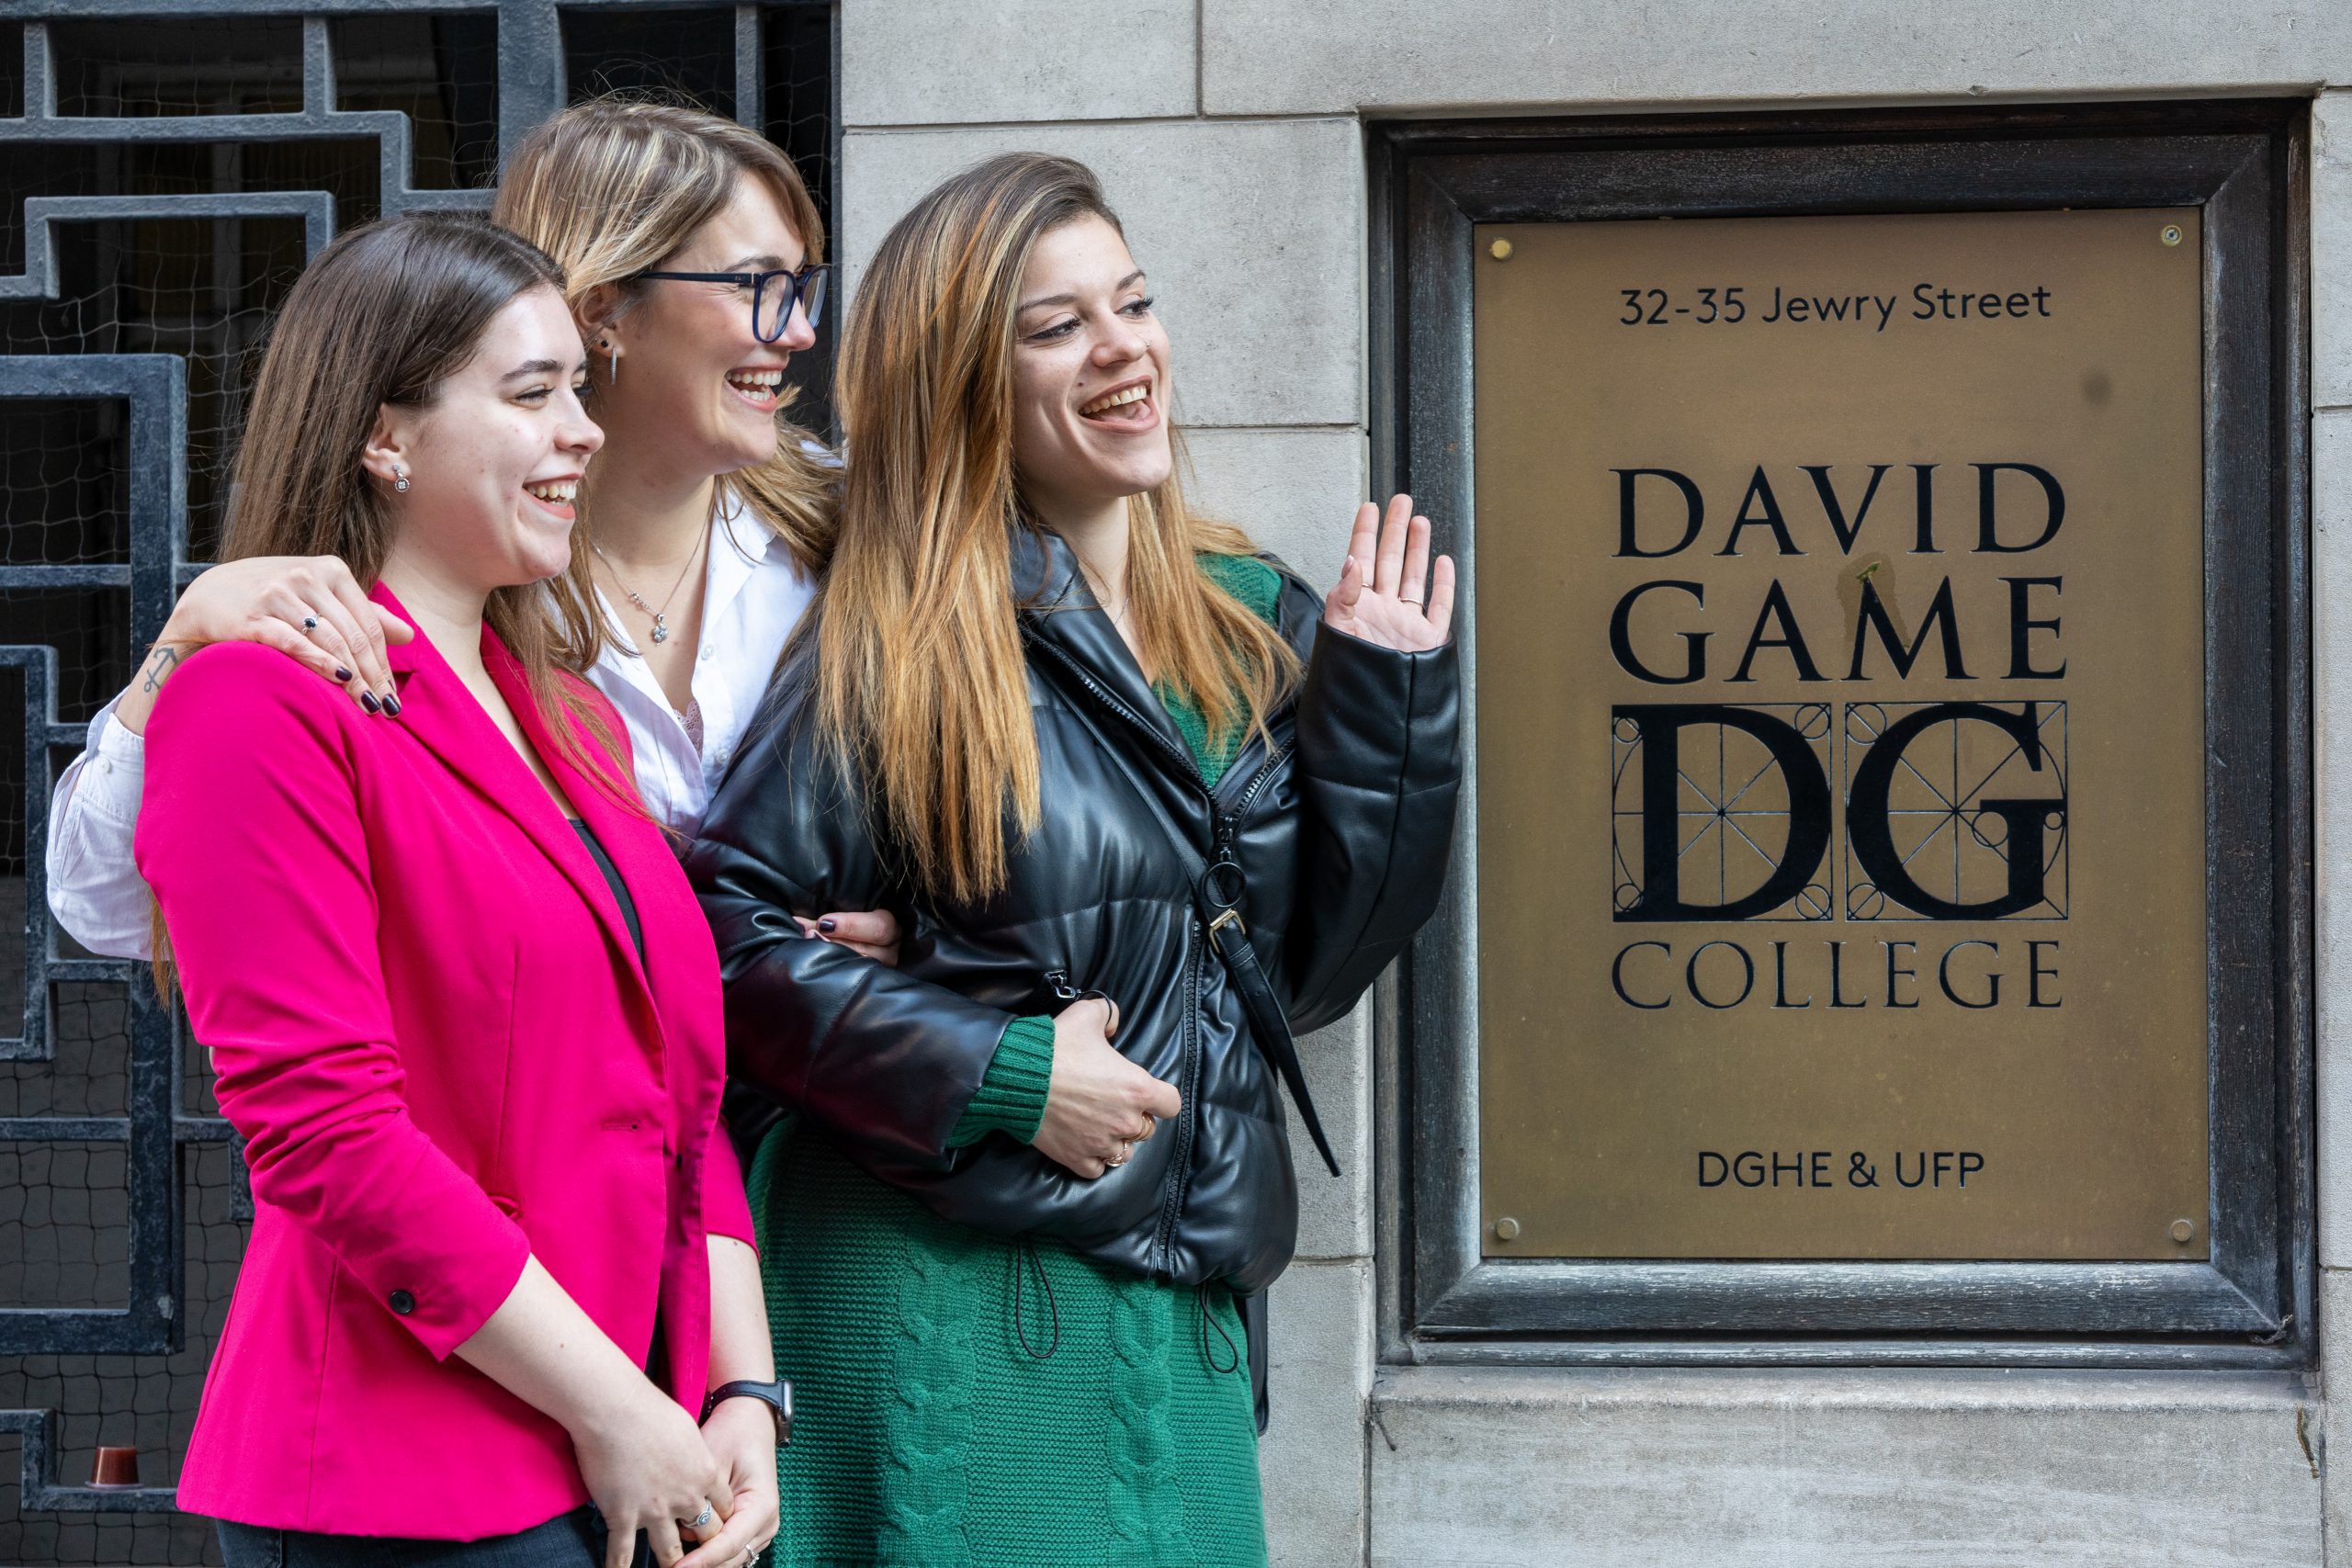 Three students stand next to the David Game College sign in front of the DGHE building. One of them waves at others out of the image. The women are very different from each other, and seem to be friends. They were casual clothing with bright colours.